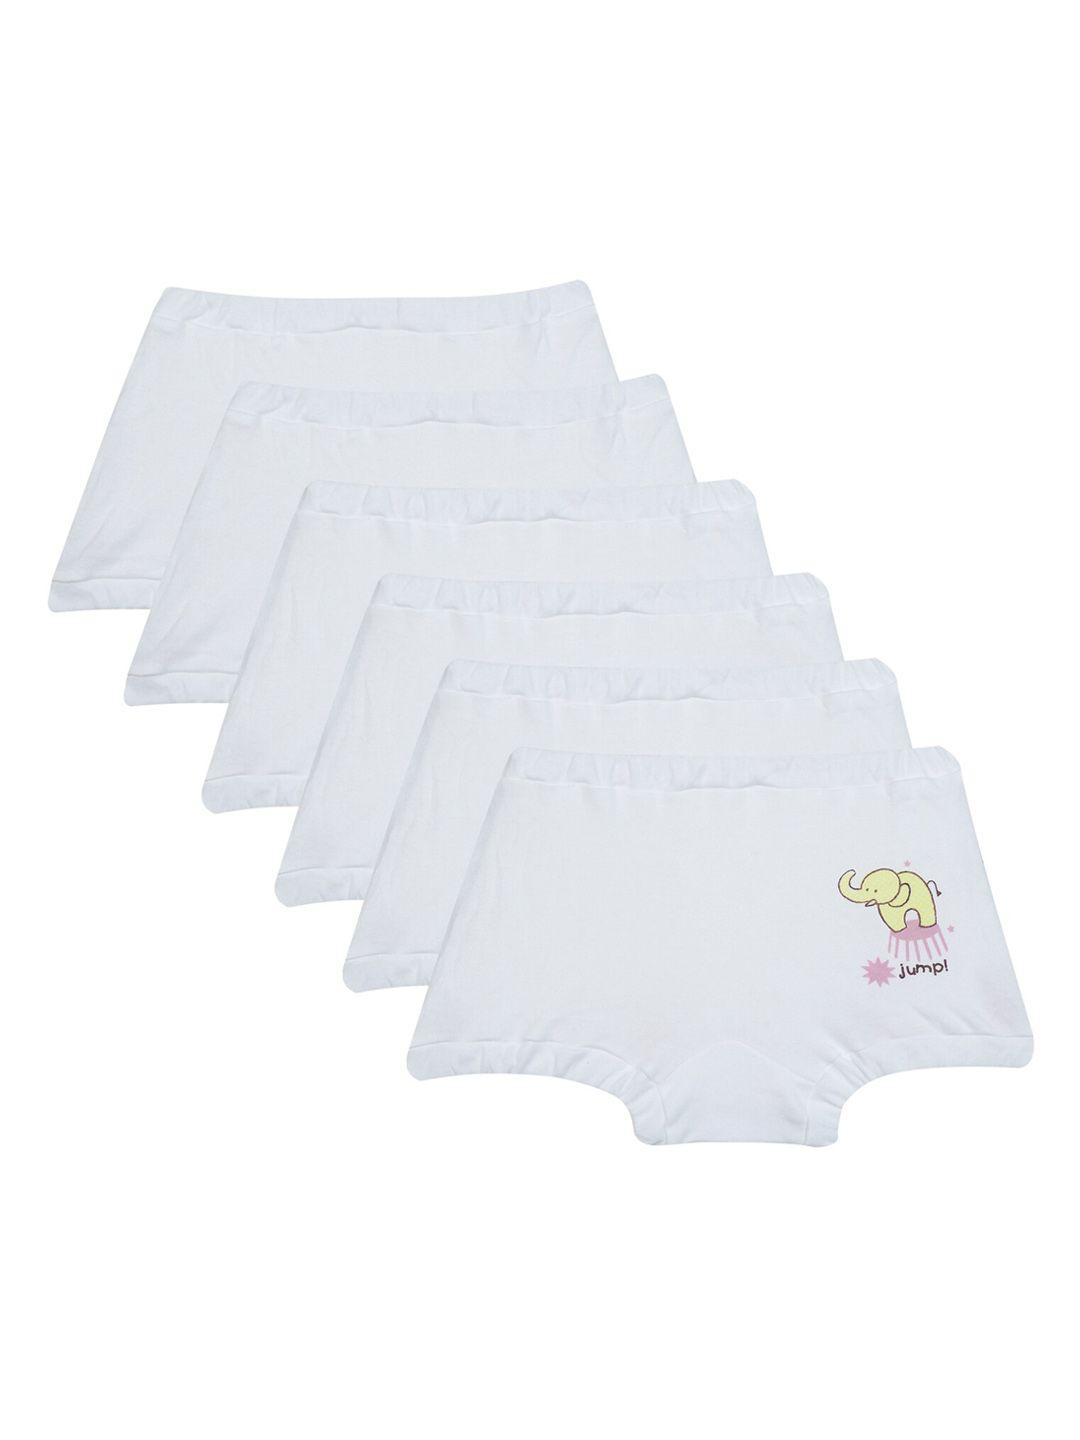 bodycare-kids-boys-pack-of-6-white-printed-cotton-trunks